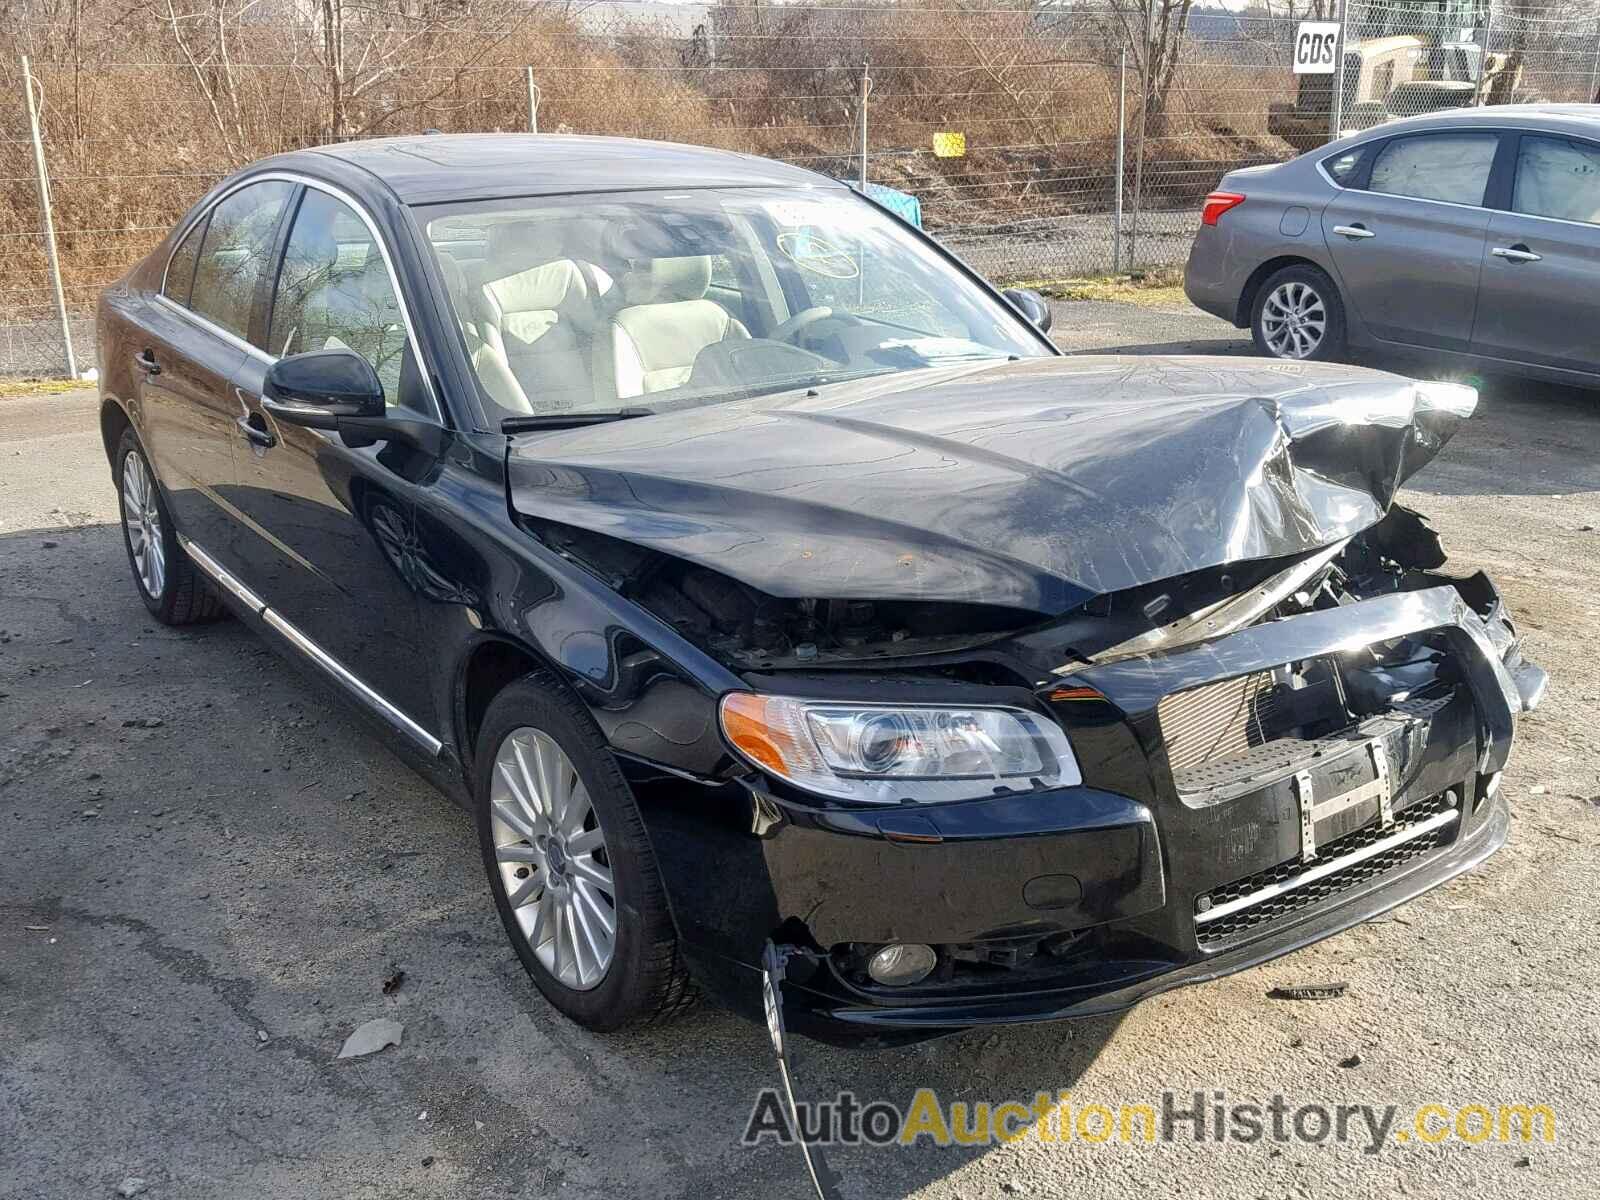 2013 VOLVO S80 3.2, YV1952AS7D1166661